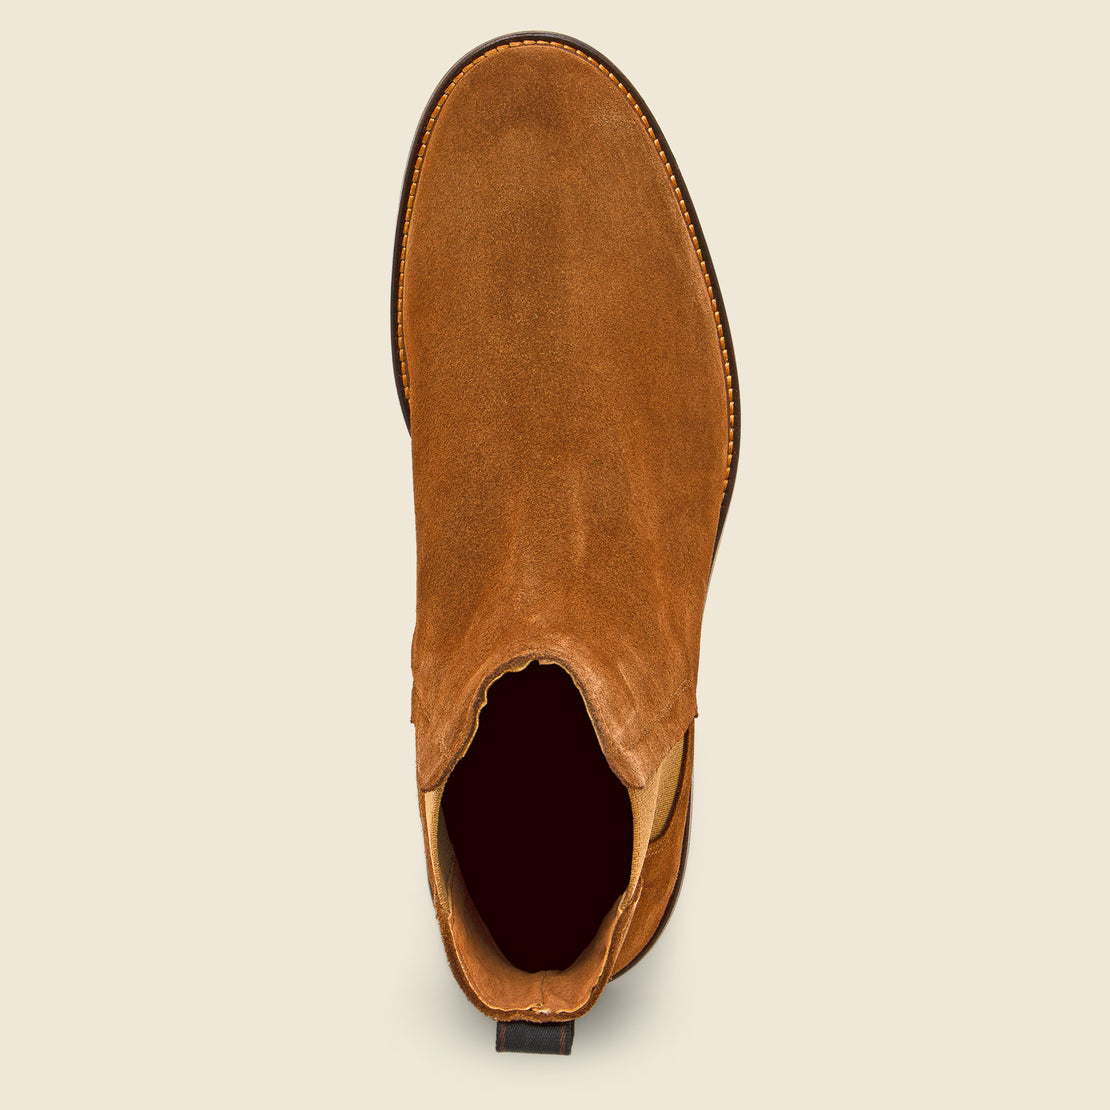 Kip Suede Chelsea Boot - Tan - Shoe the Bear - STAG Provisions - Shoes - Boots / Chukkas